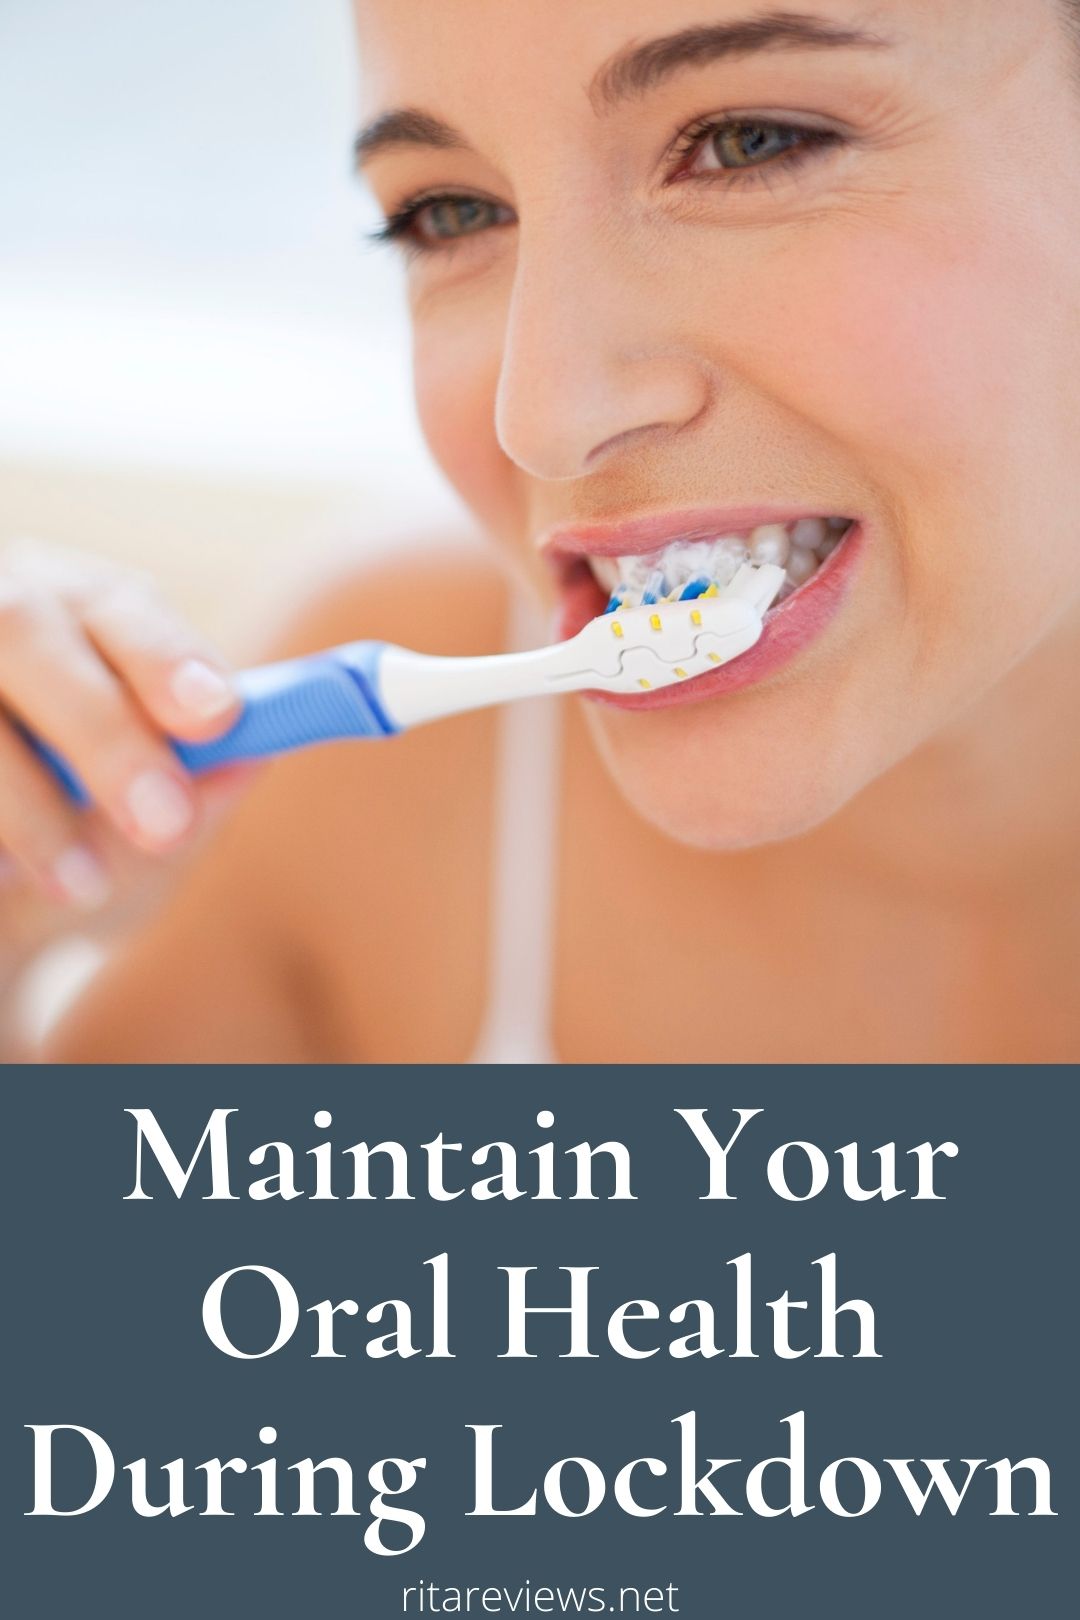 How to Maintain Your Oral Health During Lockdown